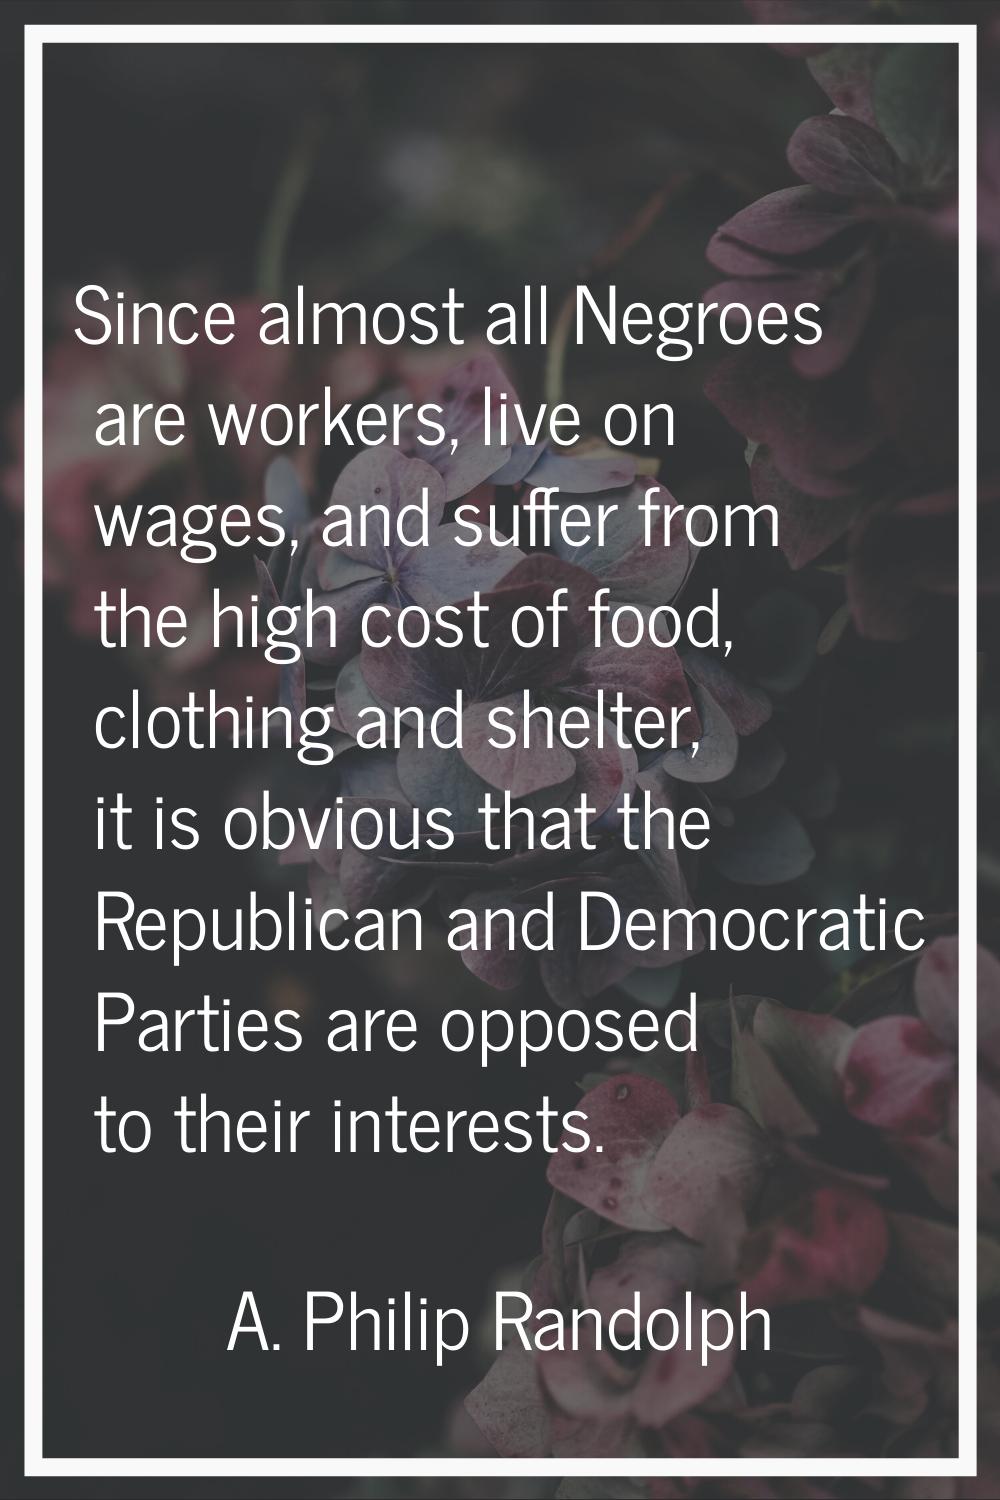 Since almost all Negroes are workers, live on wages, and suffer from the high cost of food, clothin